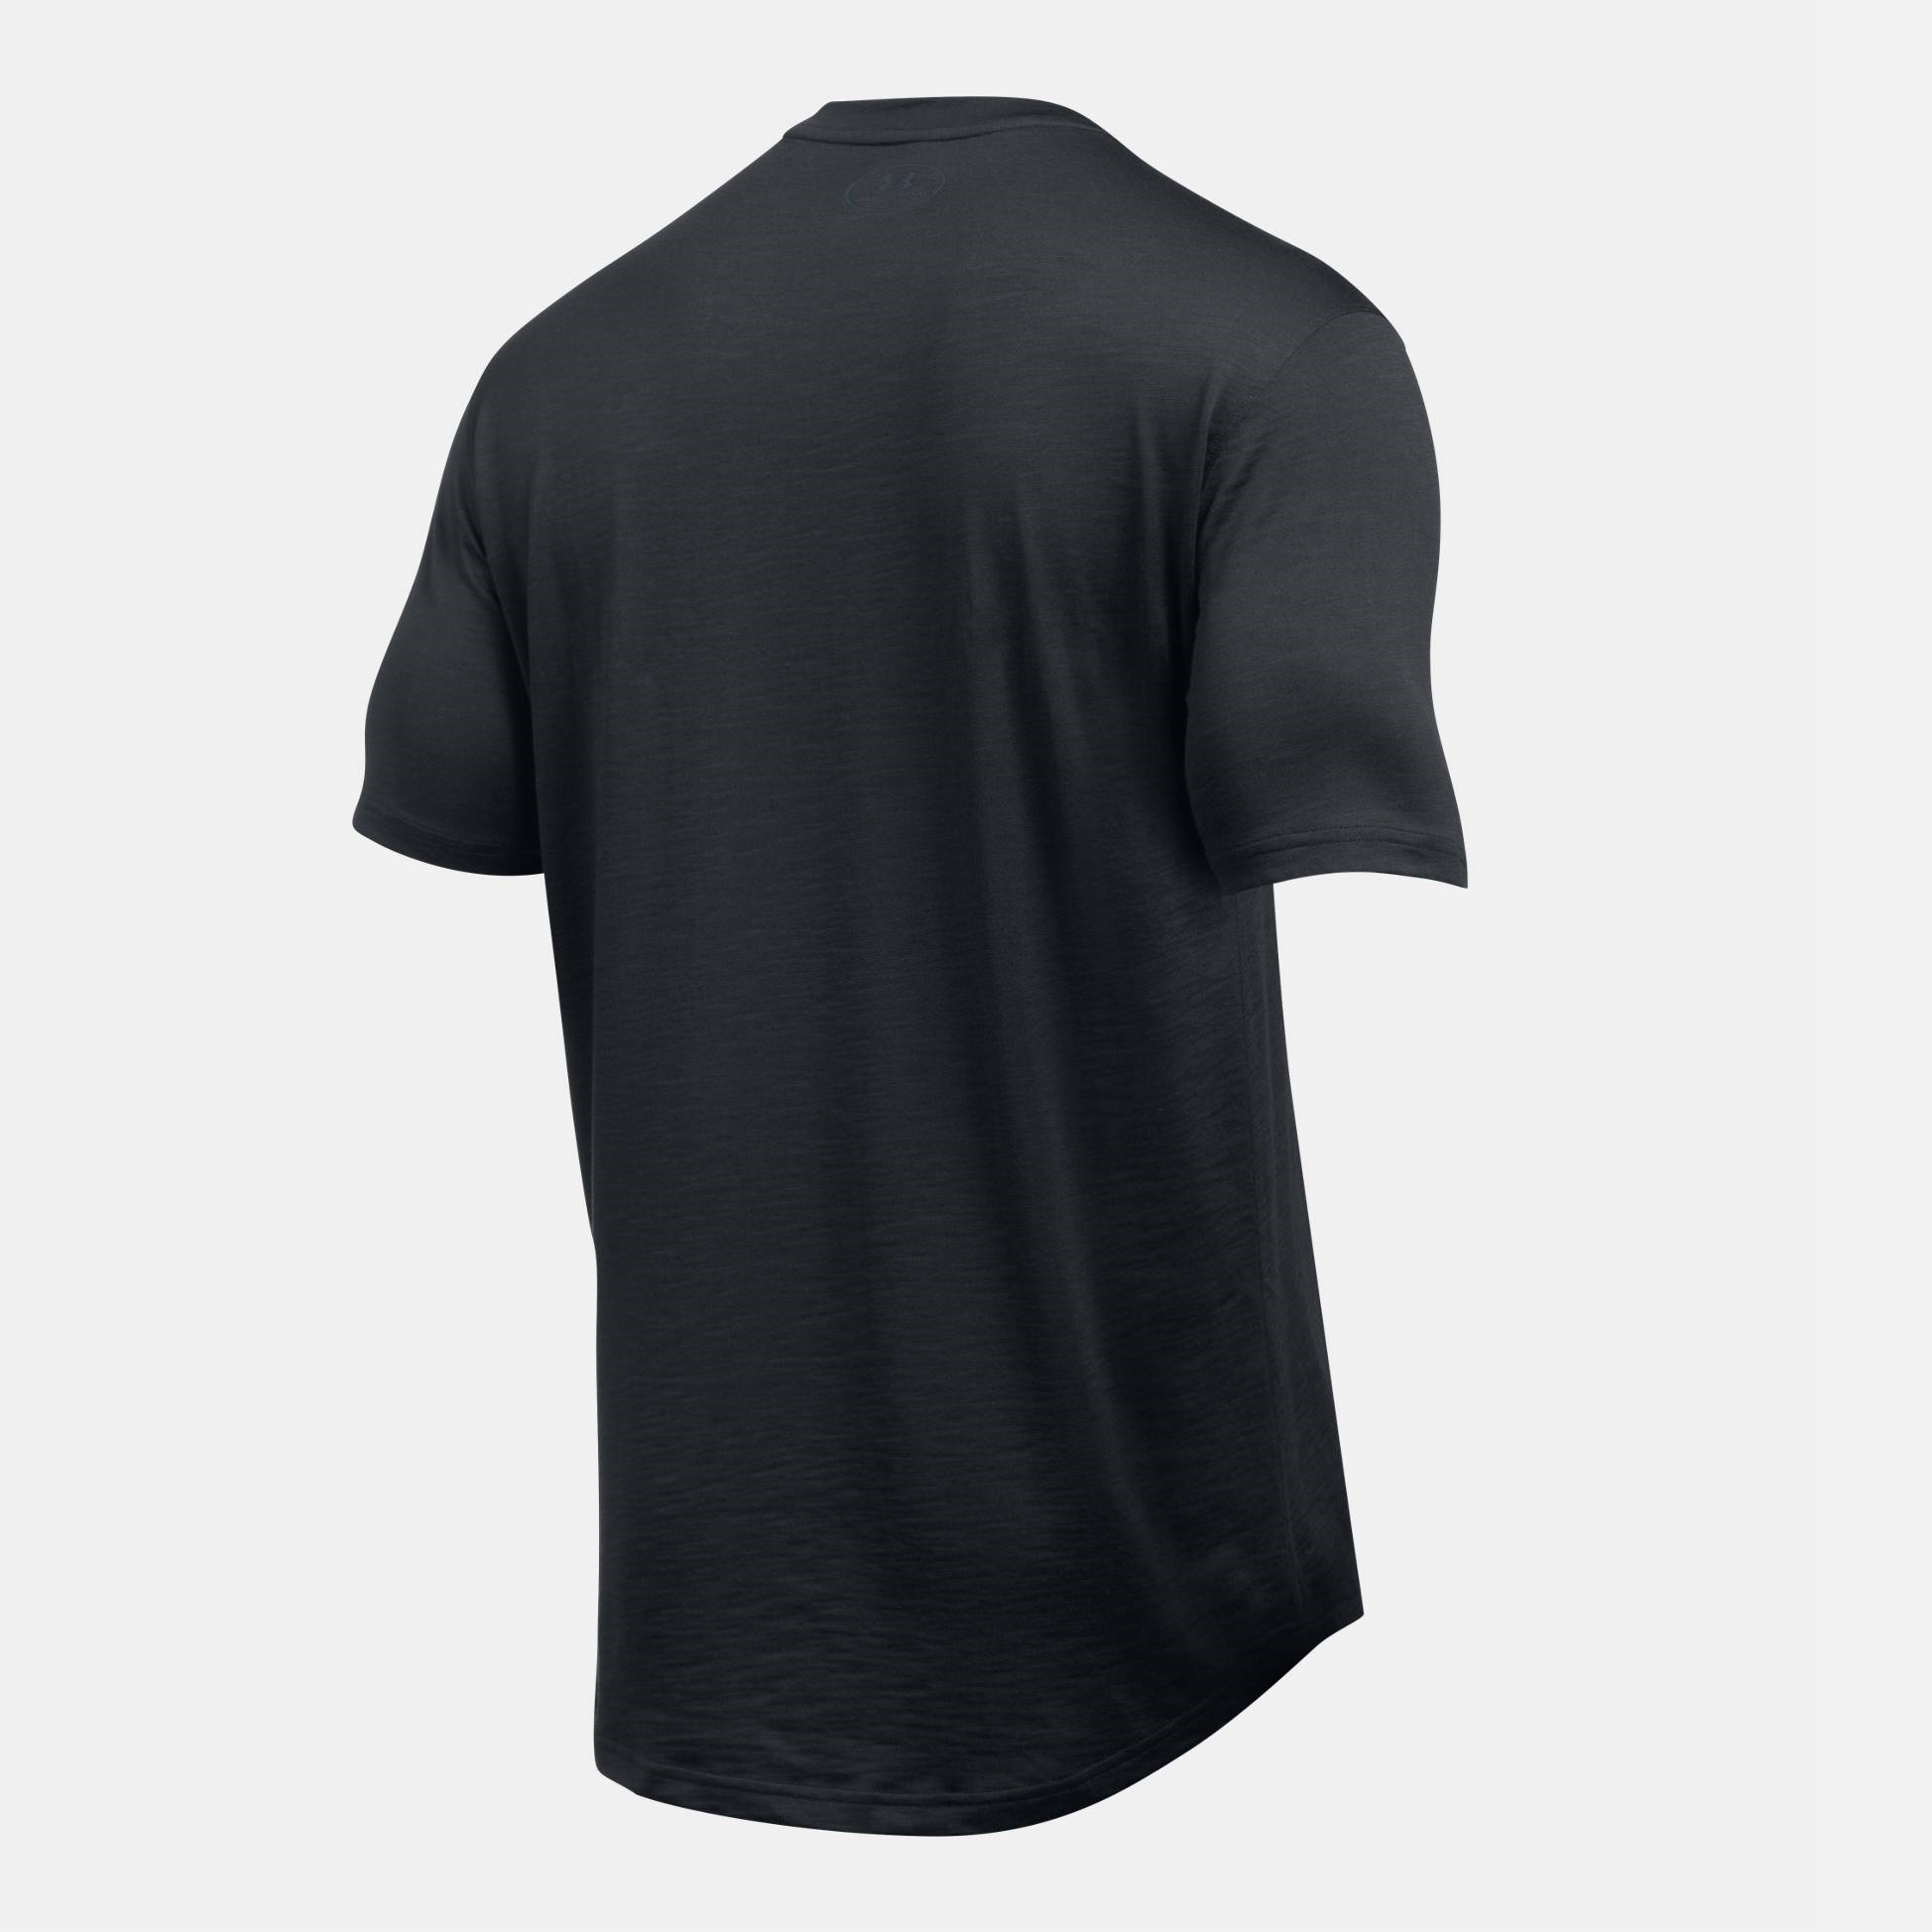  -  under armour Sportstyle Core Shirt